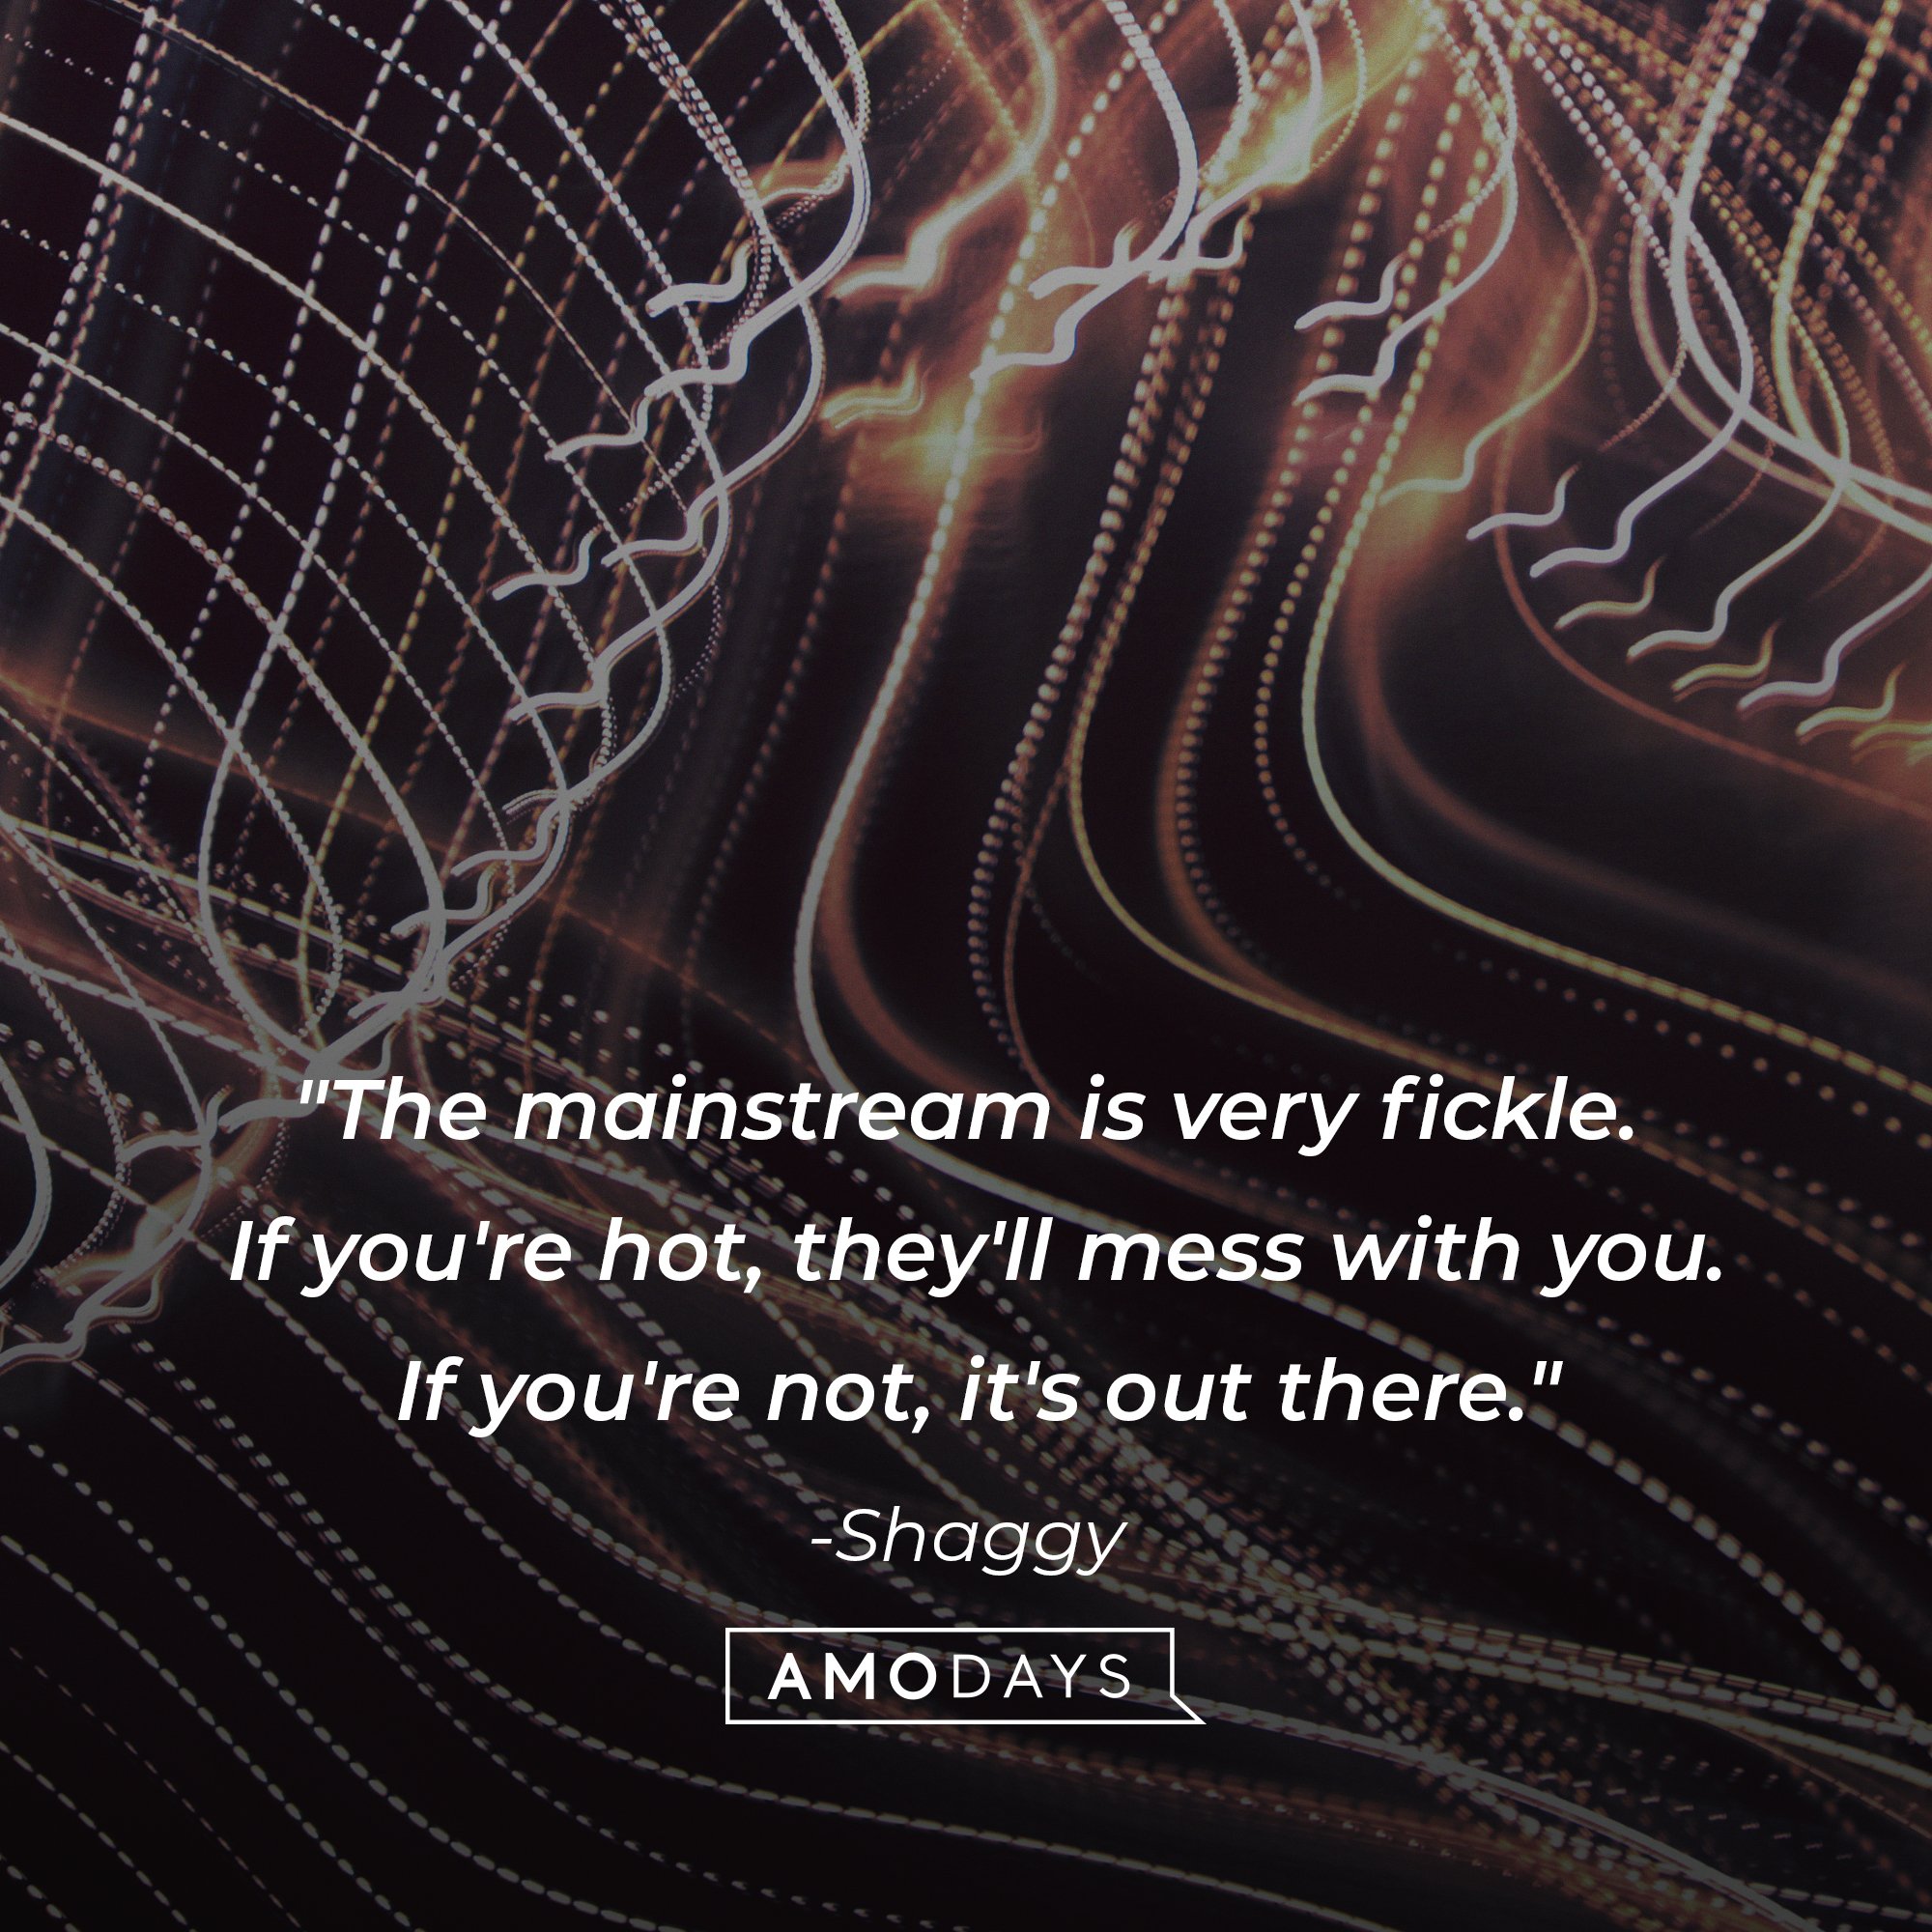 Shaggy's quote: "The mainstream is very fickle. If you're hot, they'll mess with you. If you're not, it's out there." | Image: AmoDays